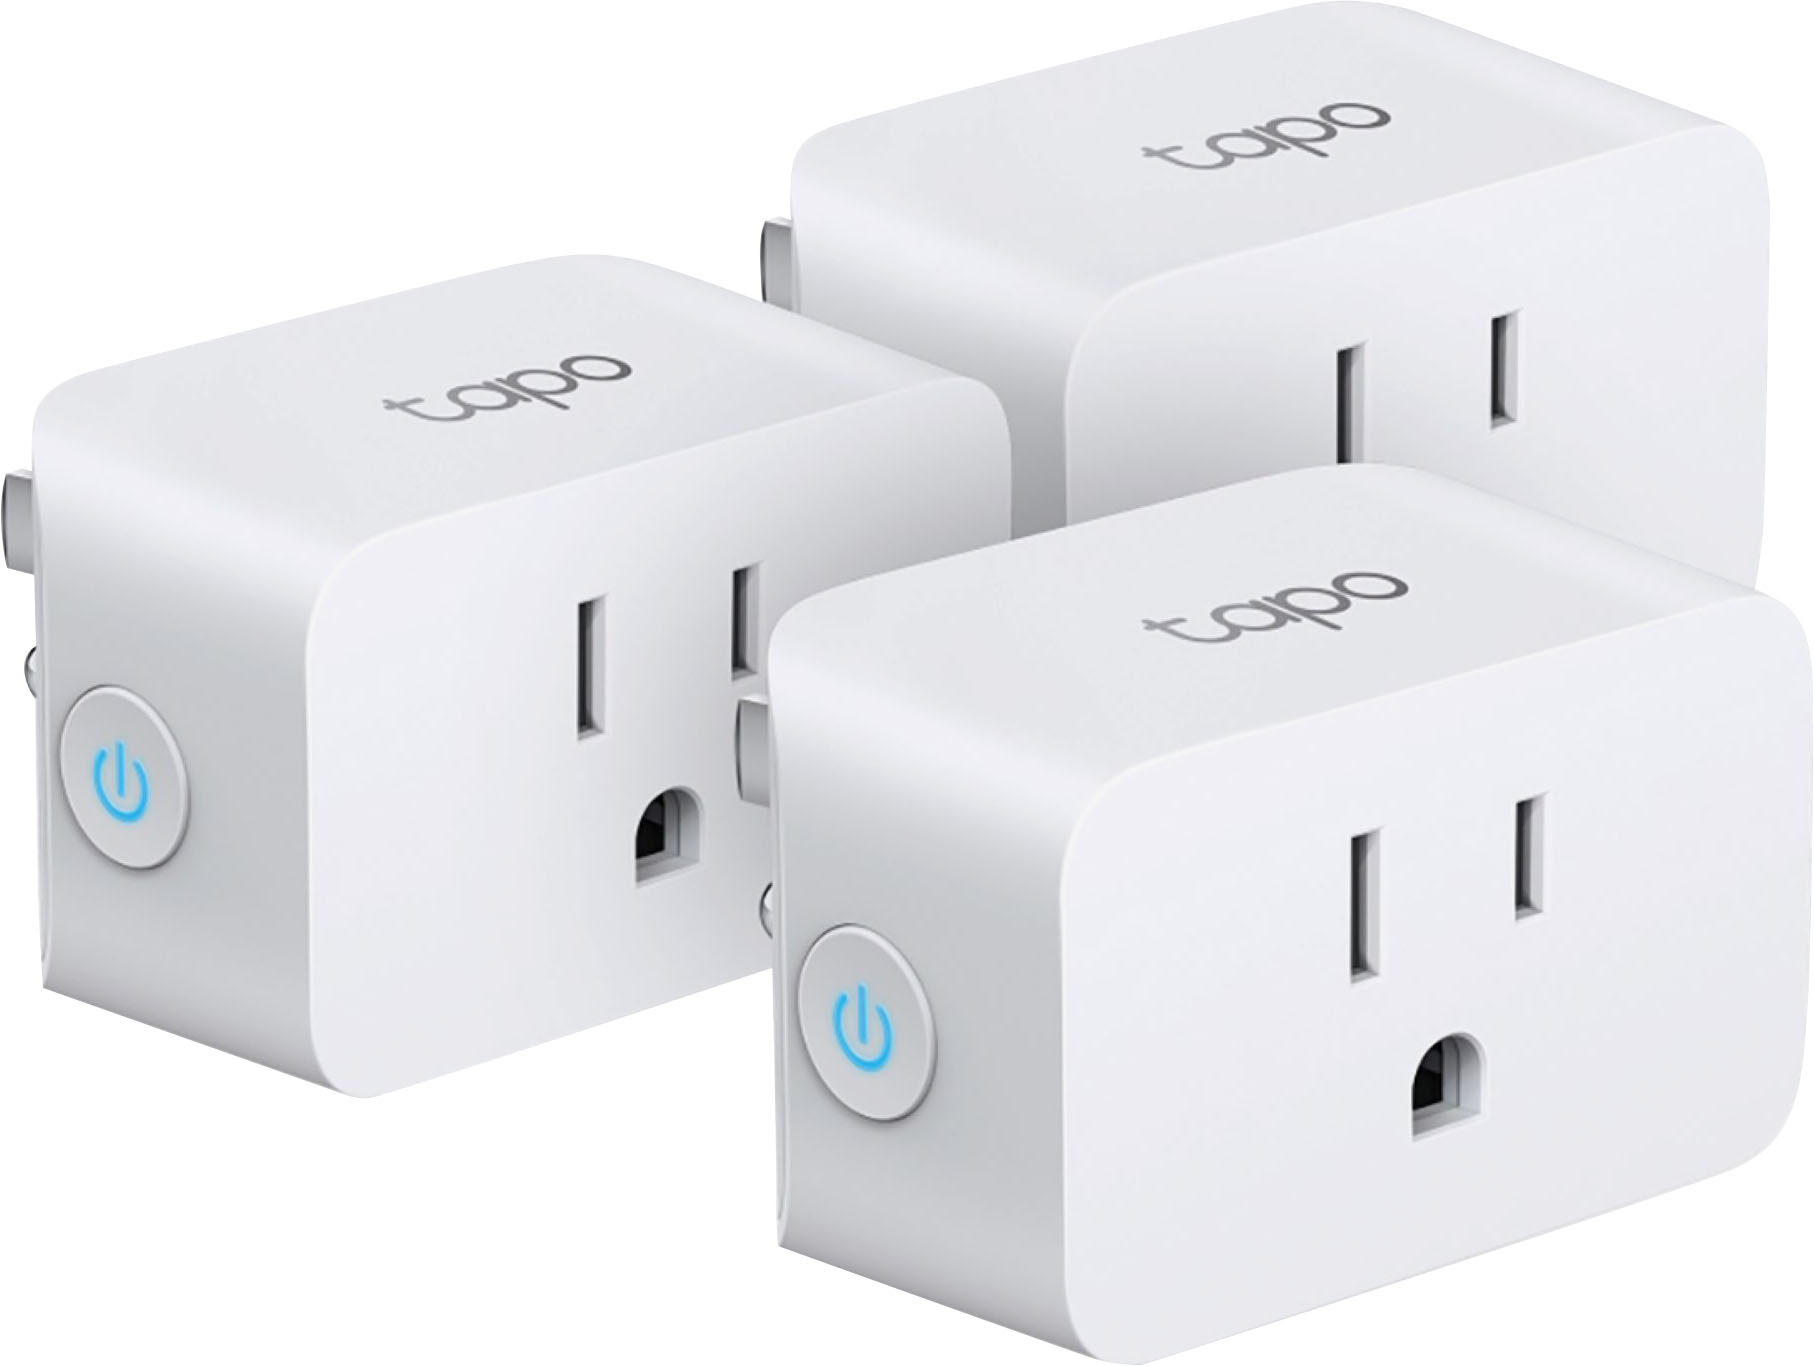 TP-Link Tapo Smart Wi-Fi Plug Mini with Matter (3-pack) White TP15(3-pack) - Best Buy $26.99